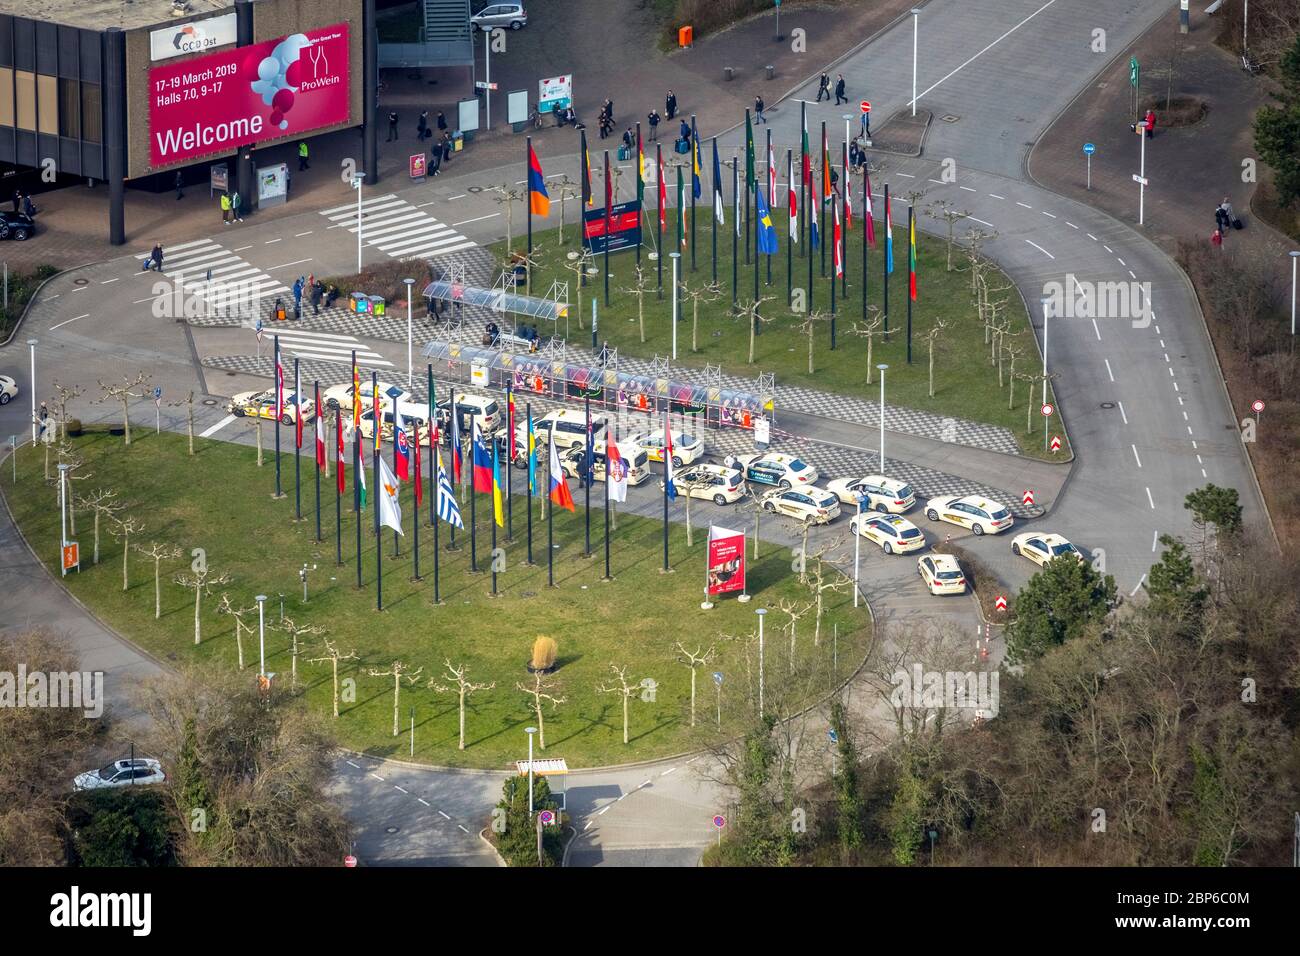 Aerial view, taxi rank, waiting taxis, taxis, flagpoles, flags, entrance to Messe Düsseldorf, Messe Düsseldorf am Rhein, new building, Düsseldorf, Rhineland, North Rhine-Westphalia, Germany Stock Photo